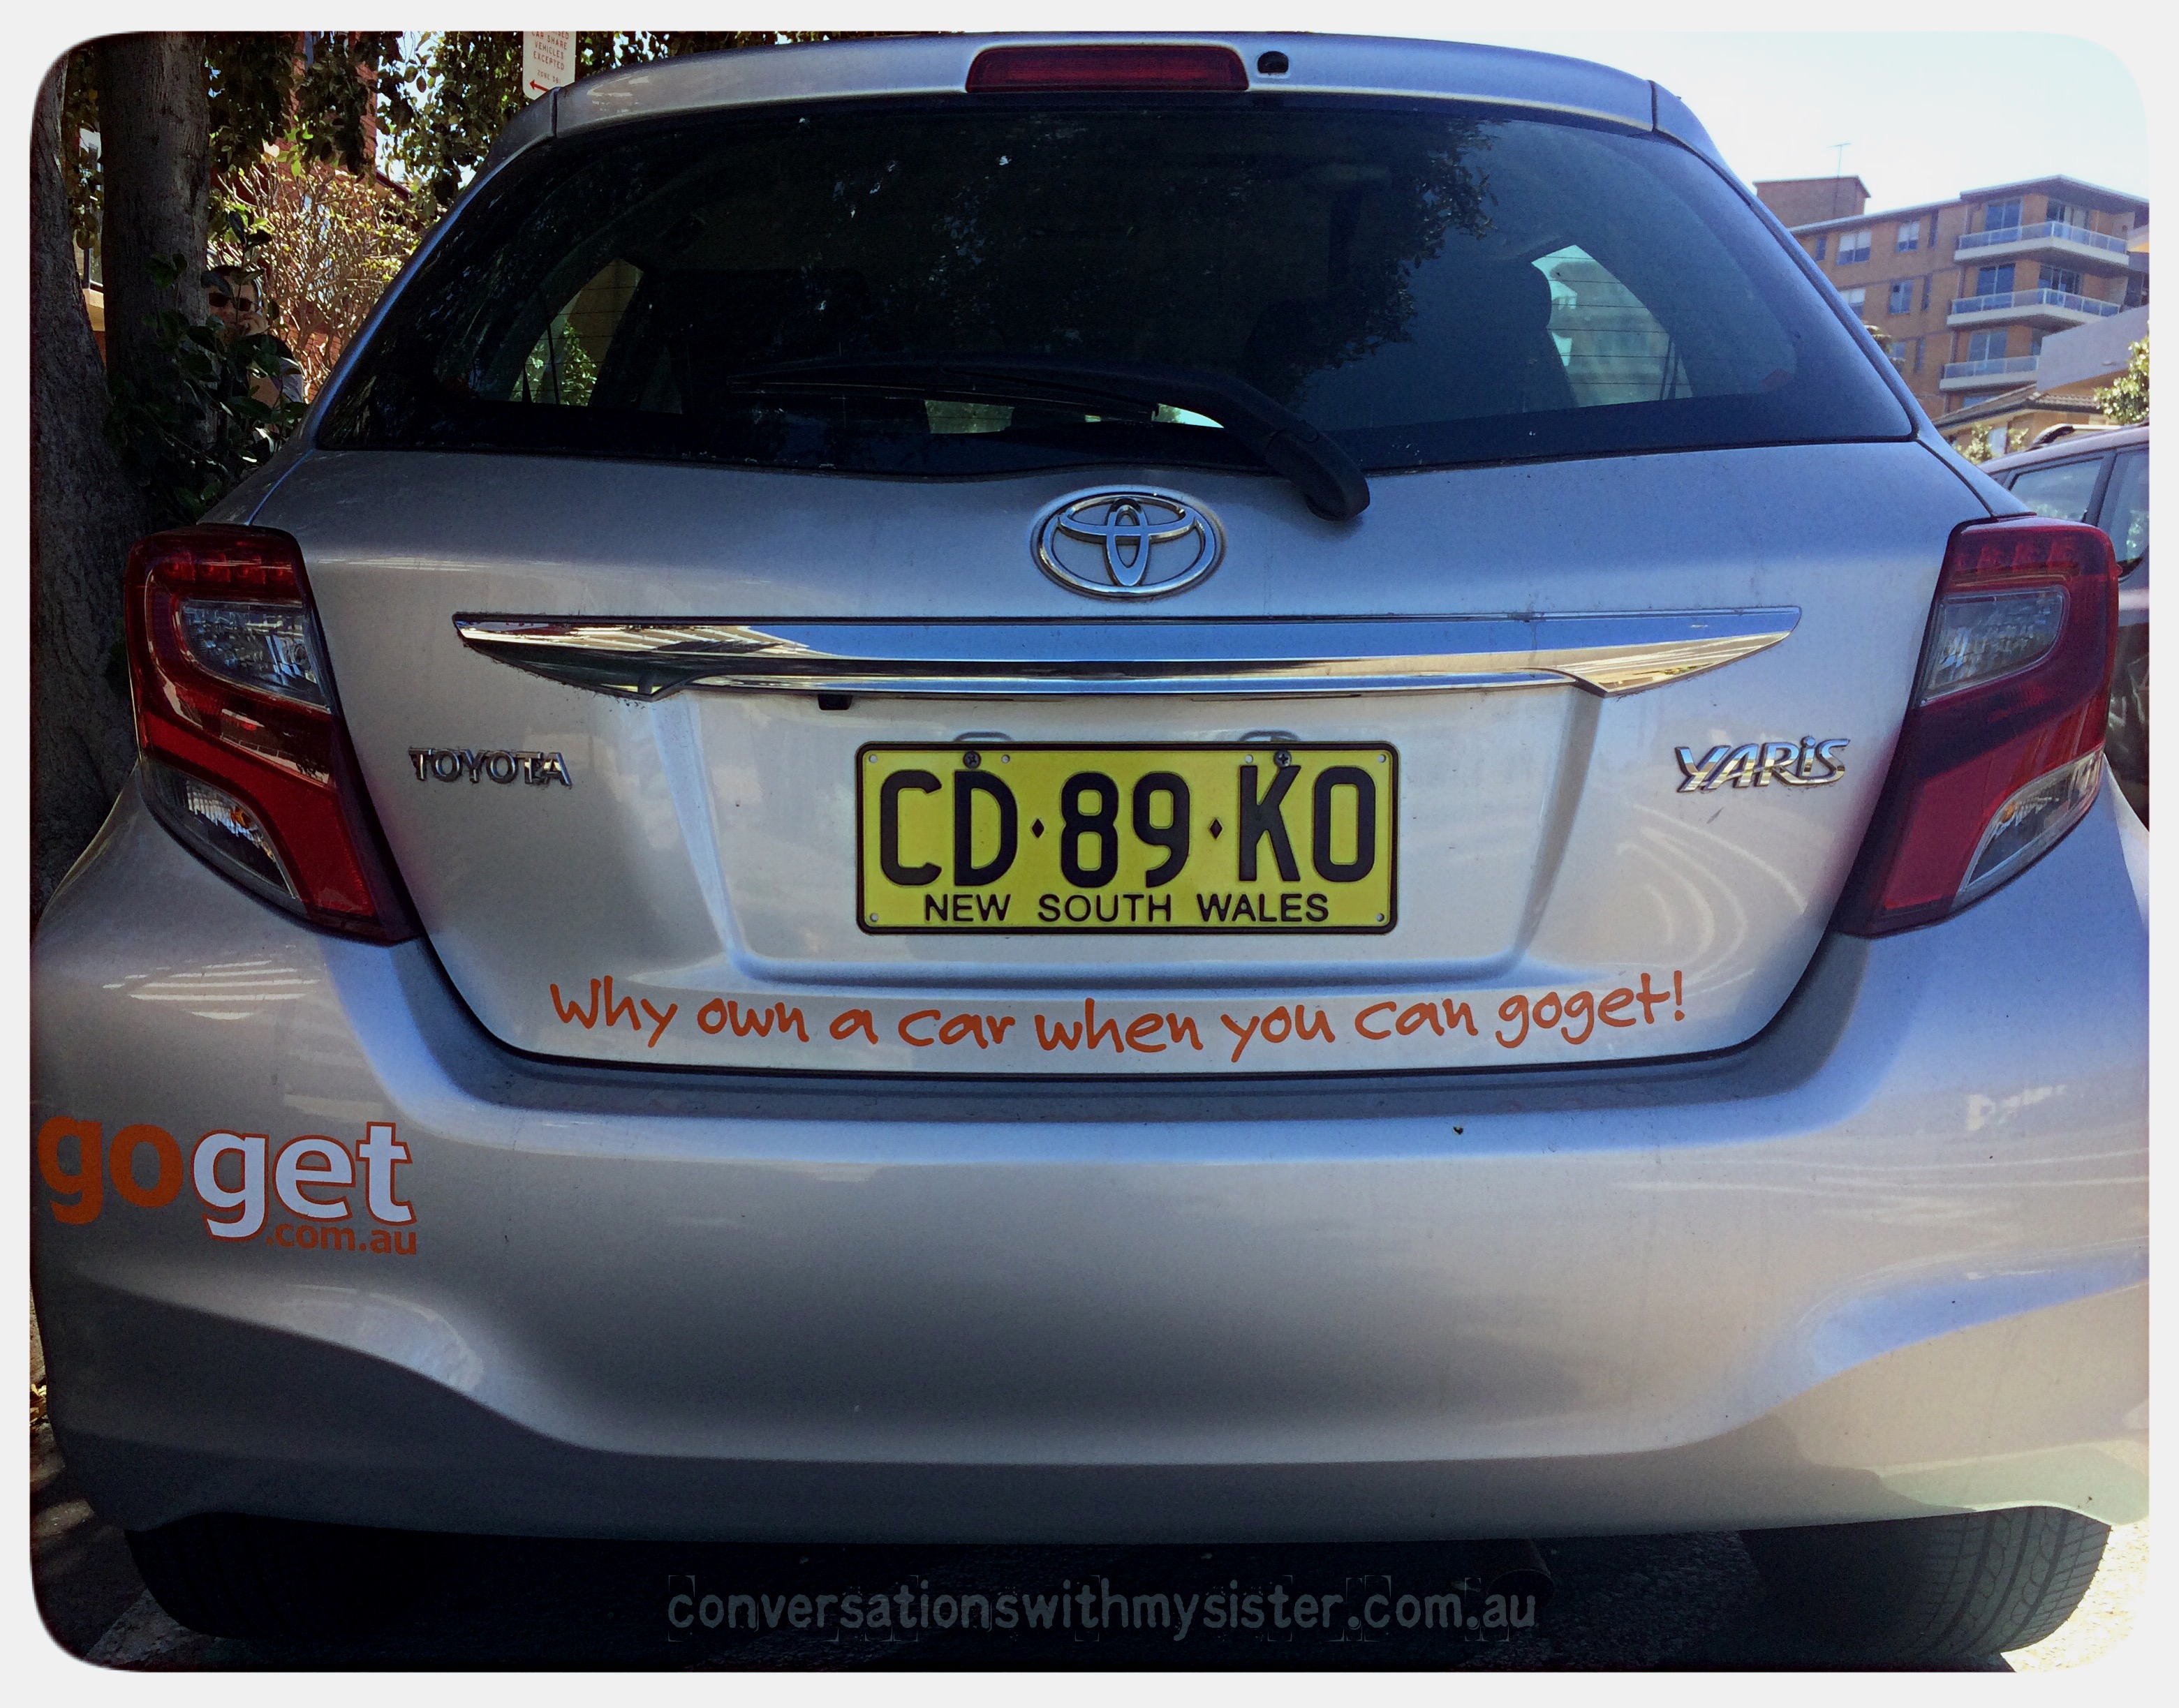 ‘GoGet’ Car Share is designed for people who occasionally need the convenience of a vehicle, without the commitment of actually owning one. Australia's first and largest national car sharing network, which provides flexibility for those times when you need a car for just a couple of hours, or maybe an odd day here and there.